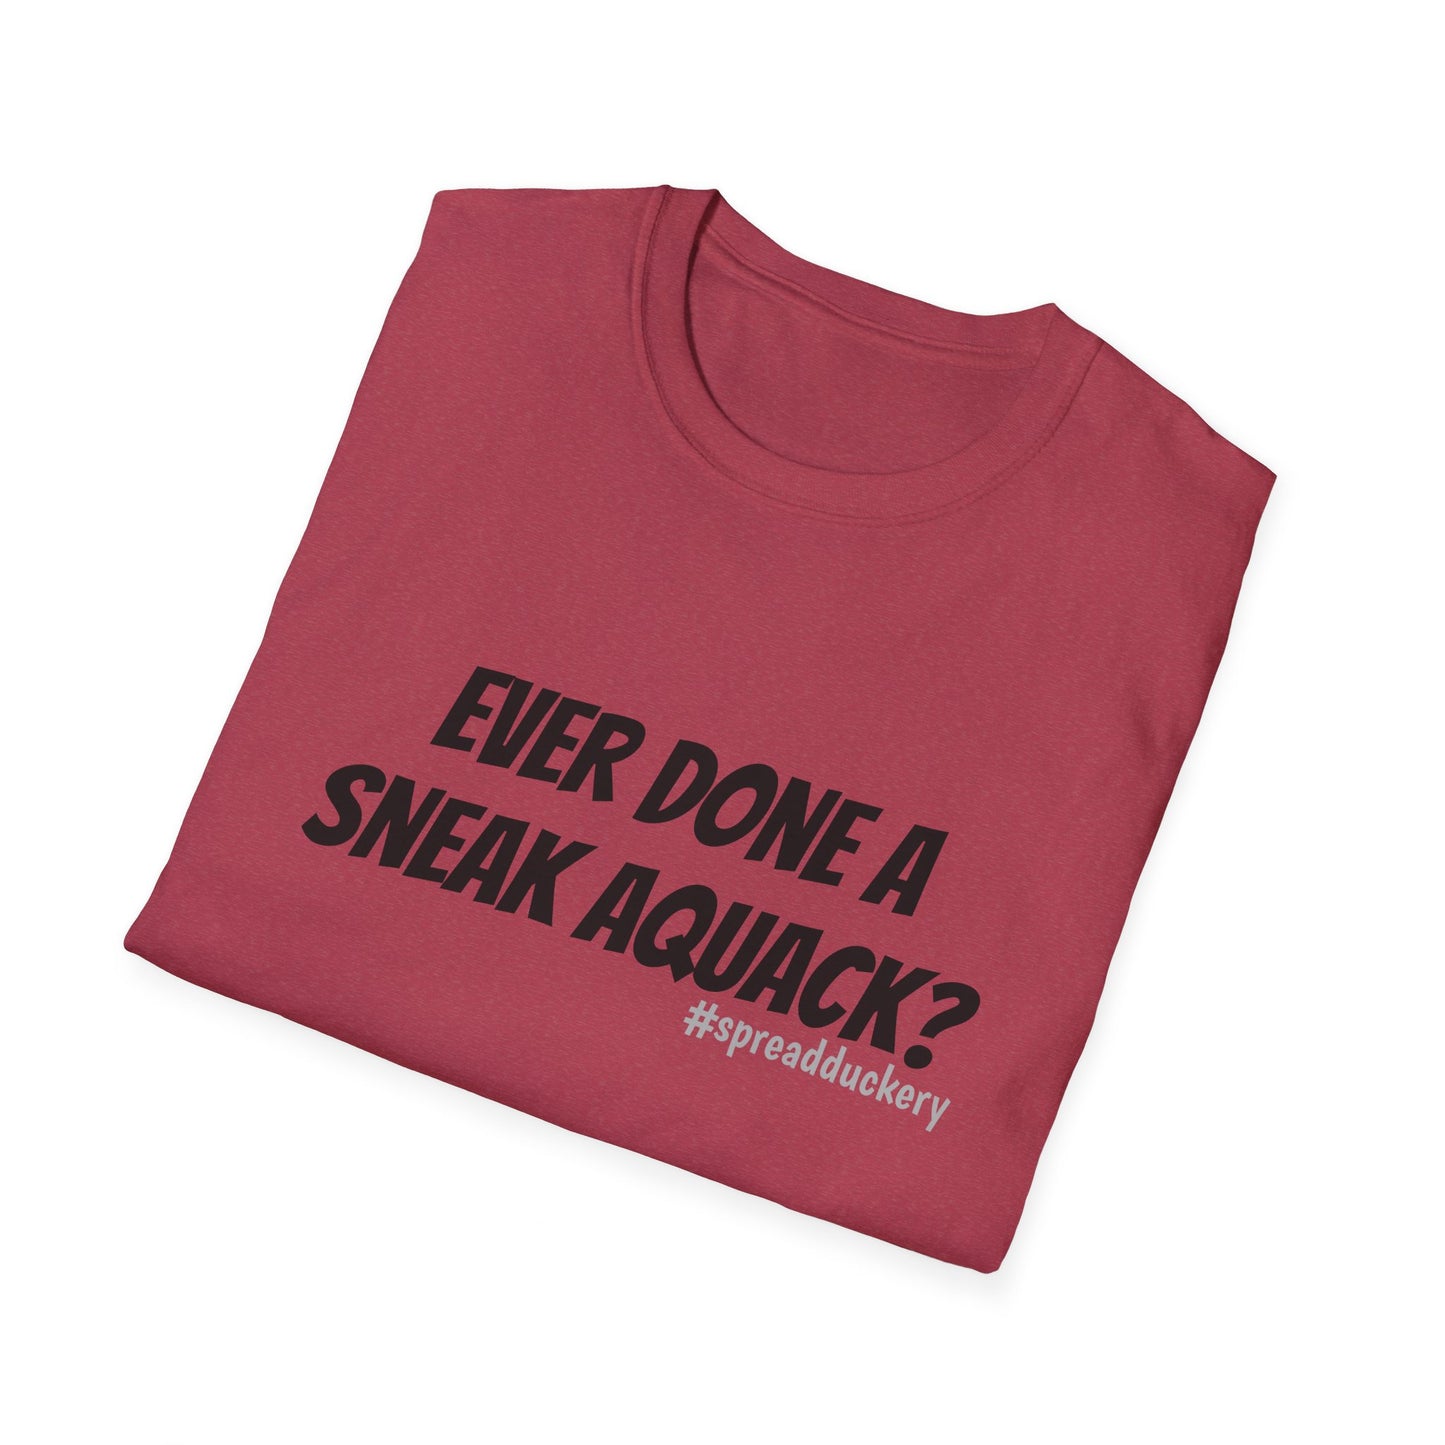 Ever Done a Sneak Aquack? Unisex Softstyle T-Shirt